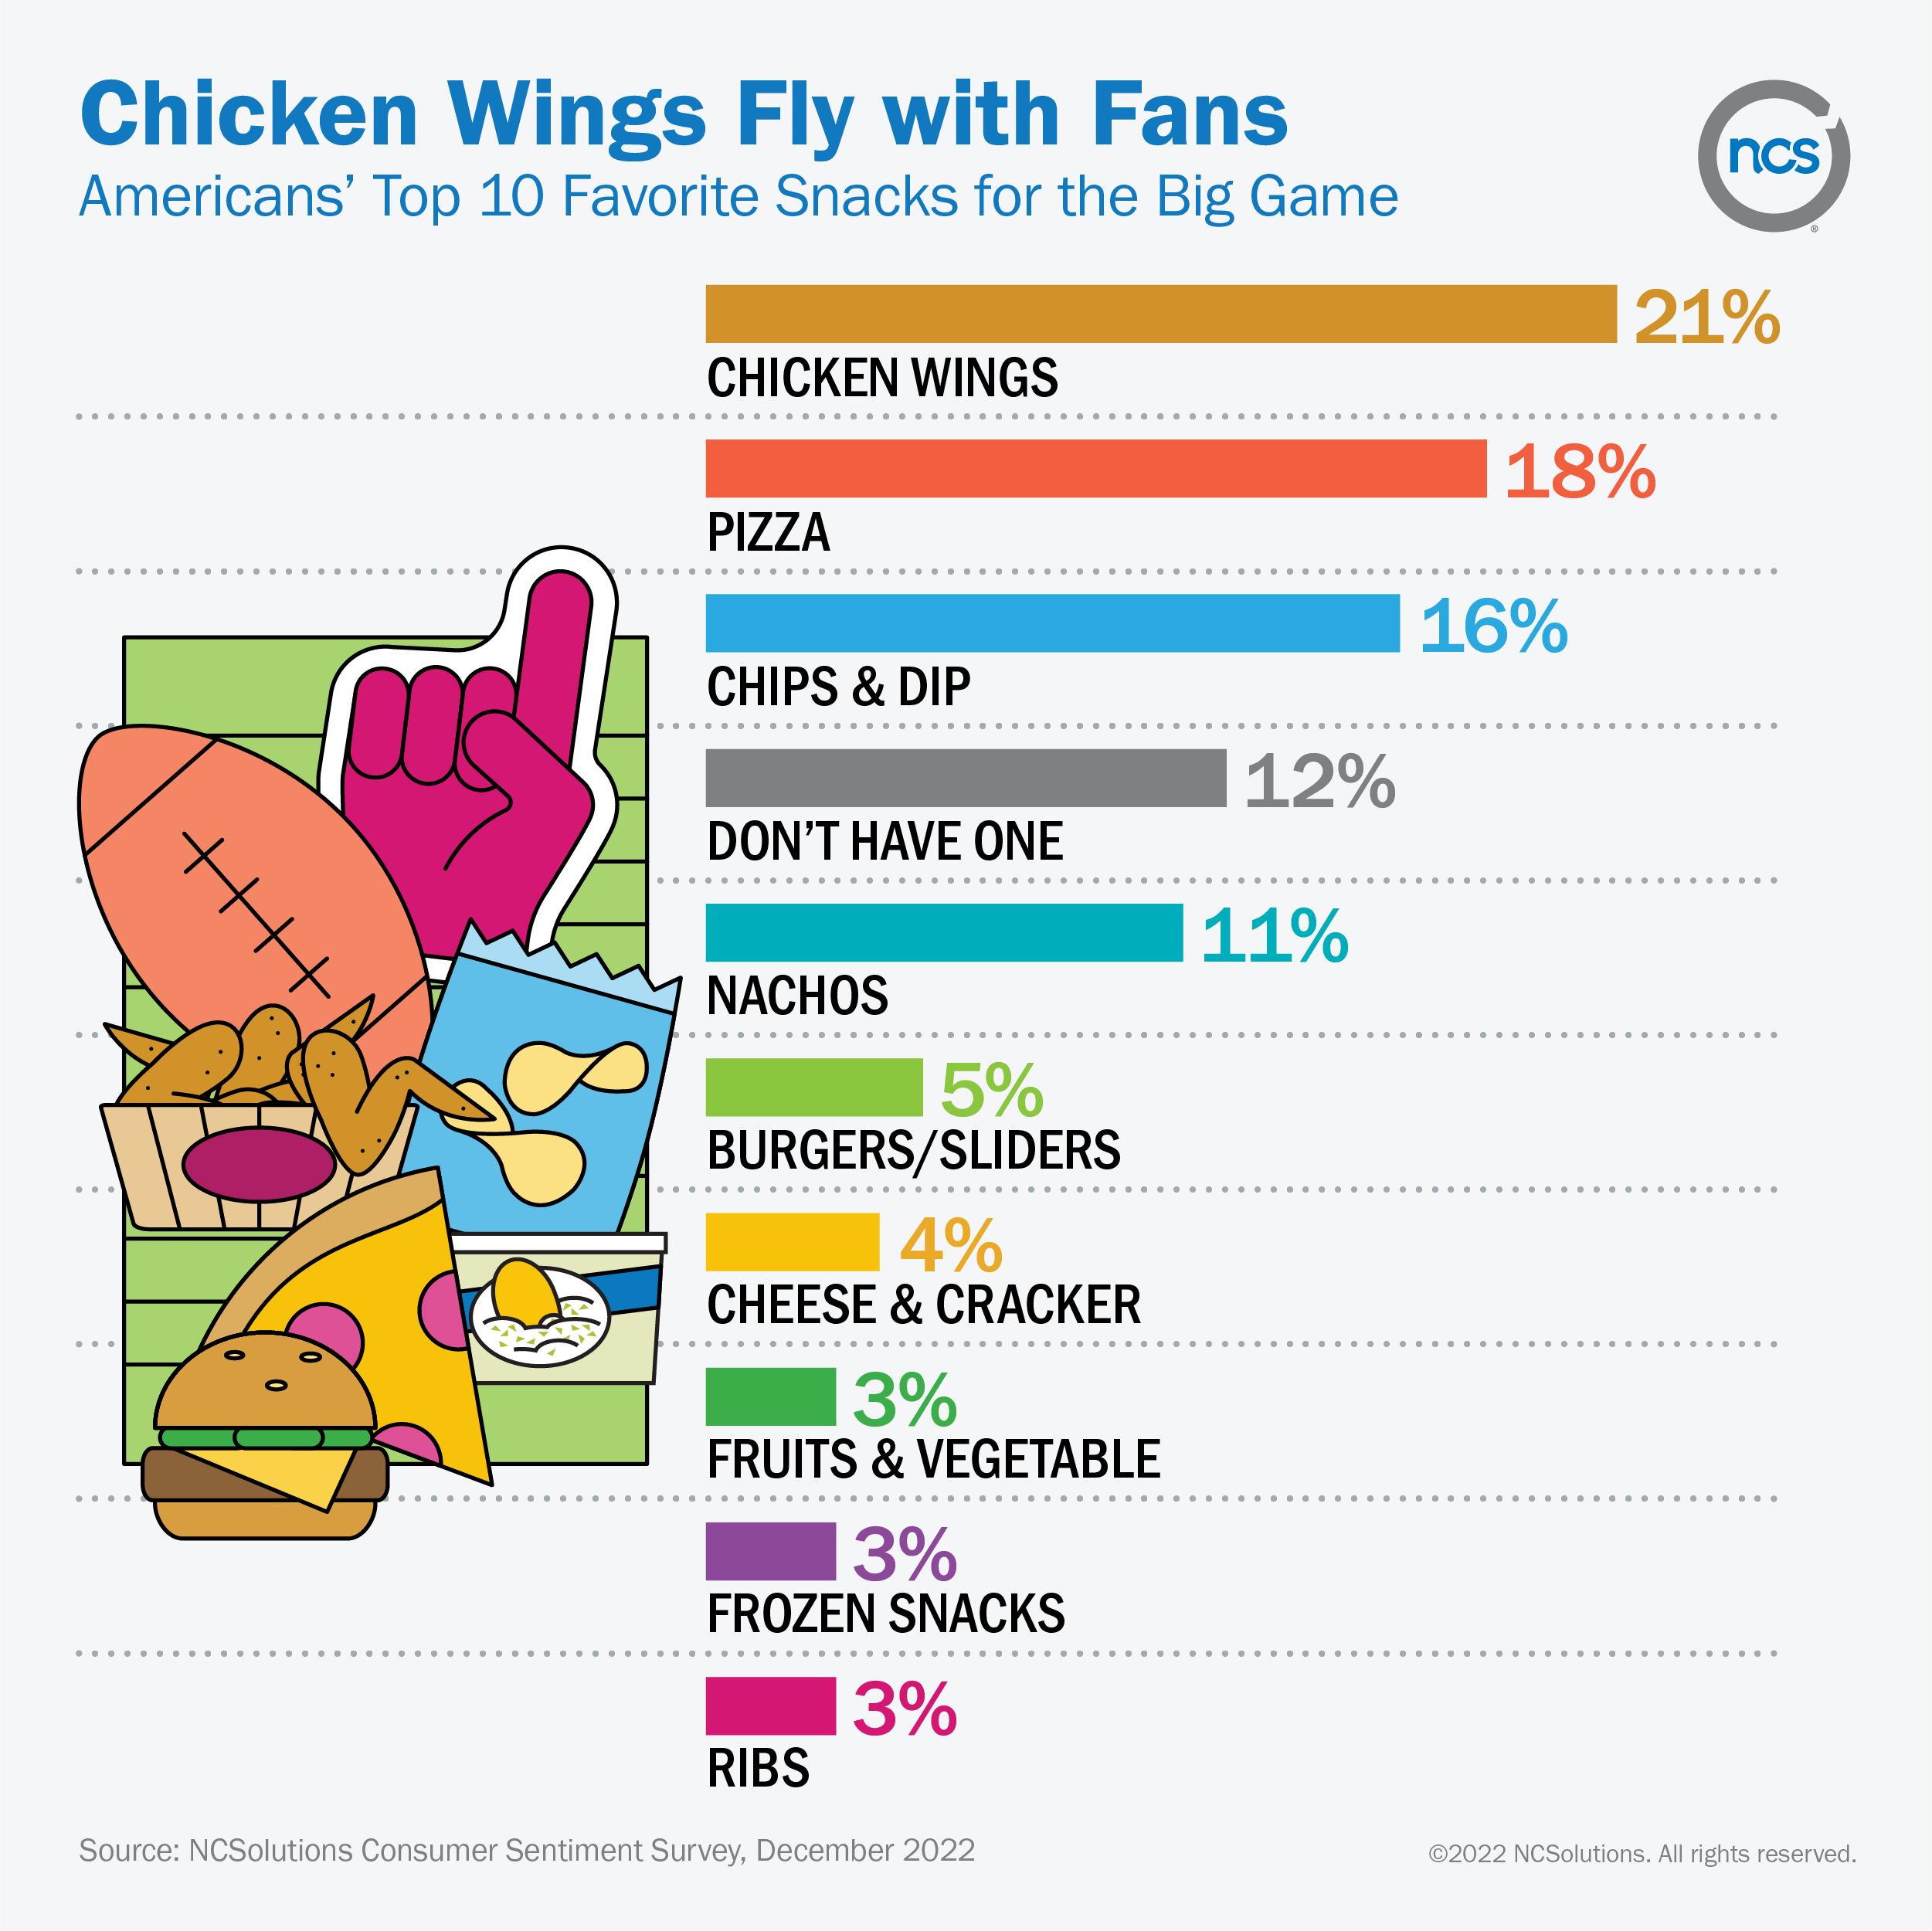 A chart shows the top 10 favorite snacks for the big game. Chicken wings come out on top, followed by pizza, chips & dip, no favorite, nachos, burgers & sliders, cheese & crackers, fruits & vegetables, frozen snacks, and ribs.